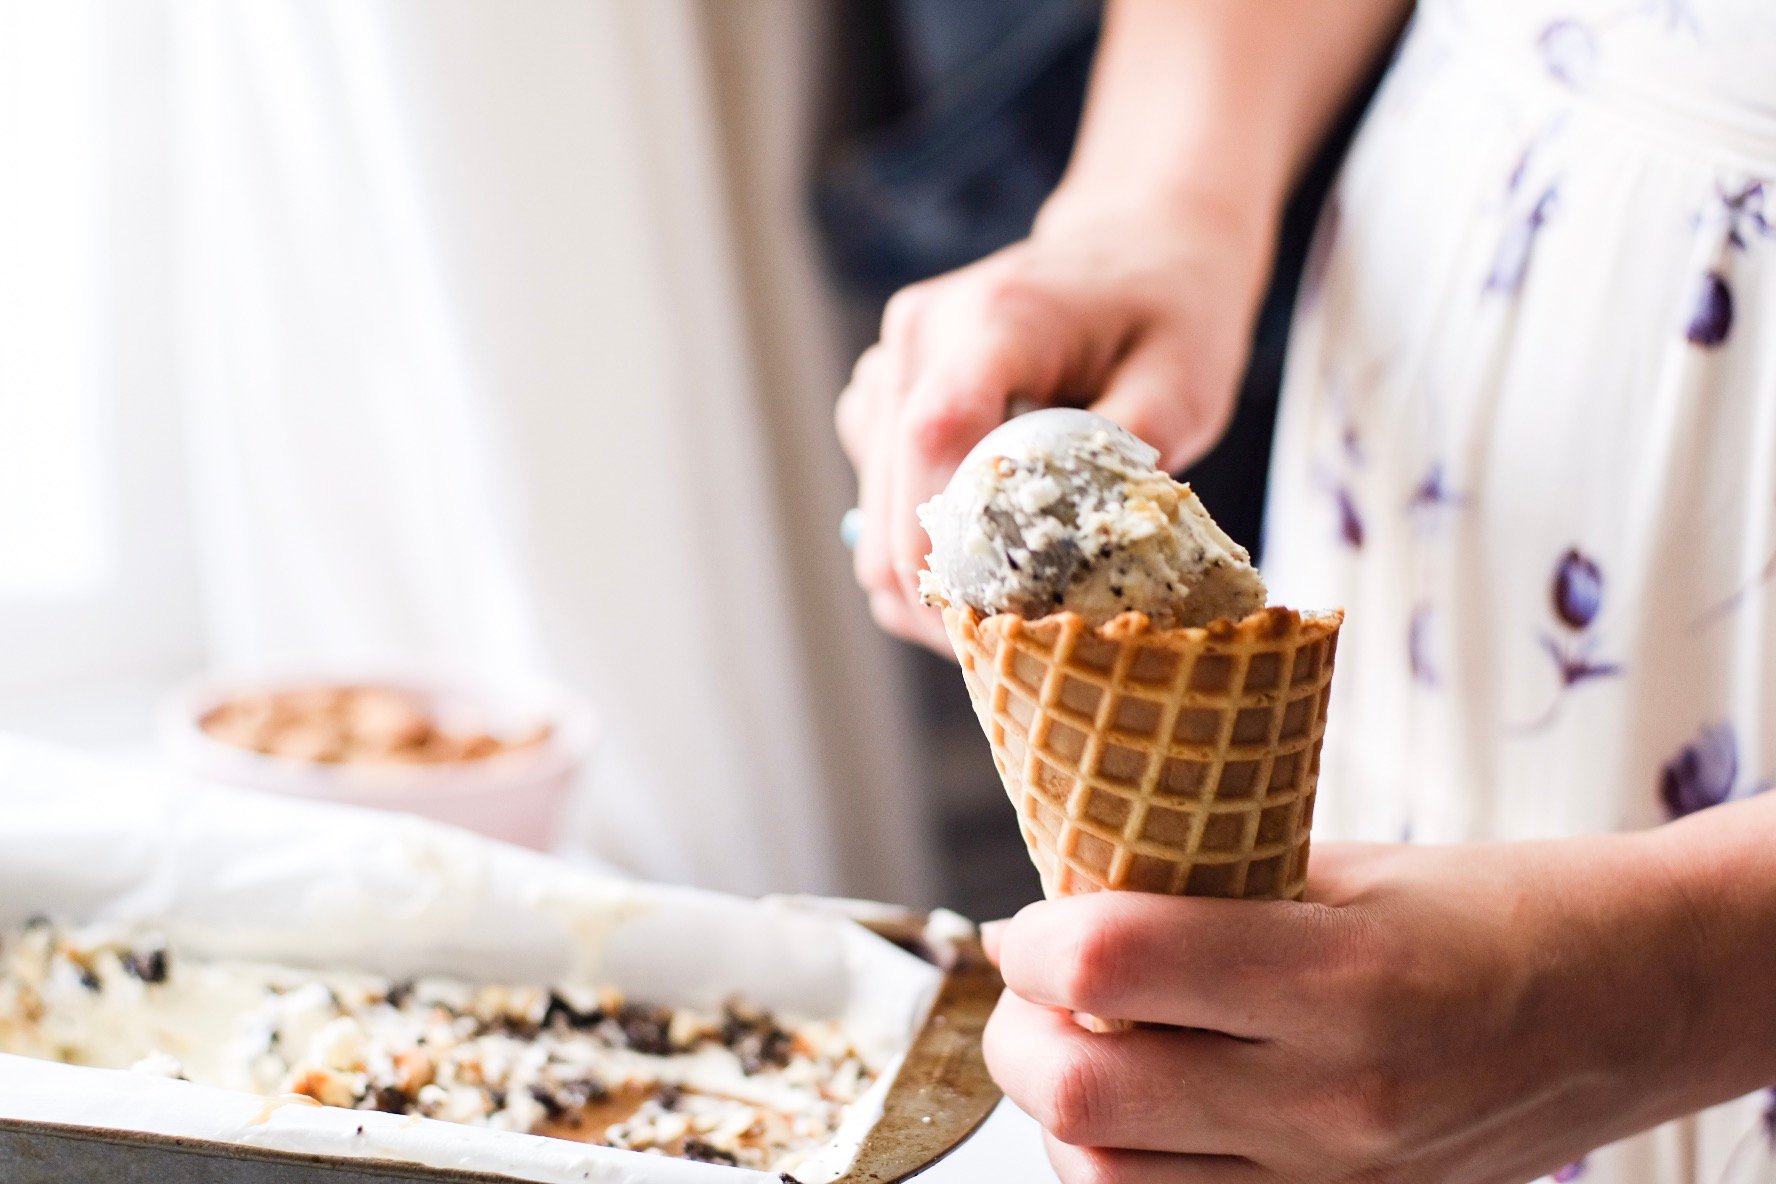 Lifestyle Blogger Chocolate and Lace shares her recipe for Oreo Salted Almond Caramel Swirl Homemade Ice Cream.